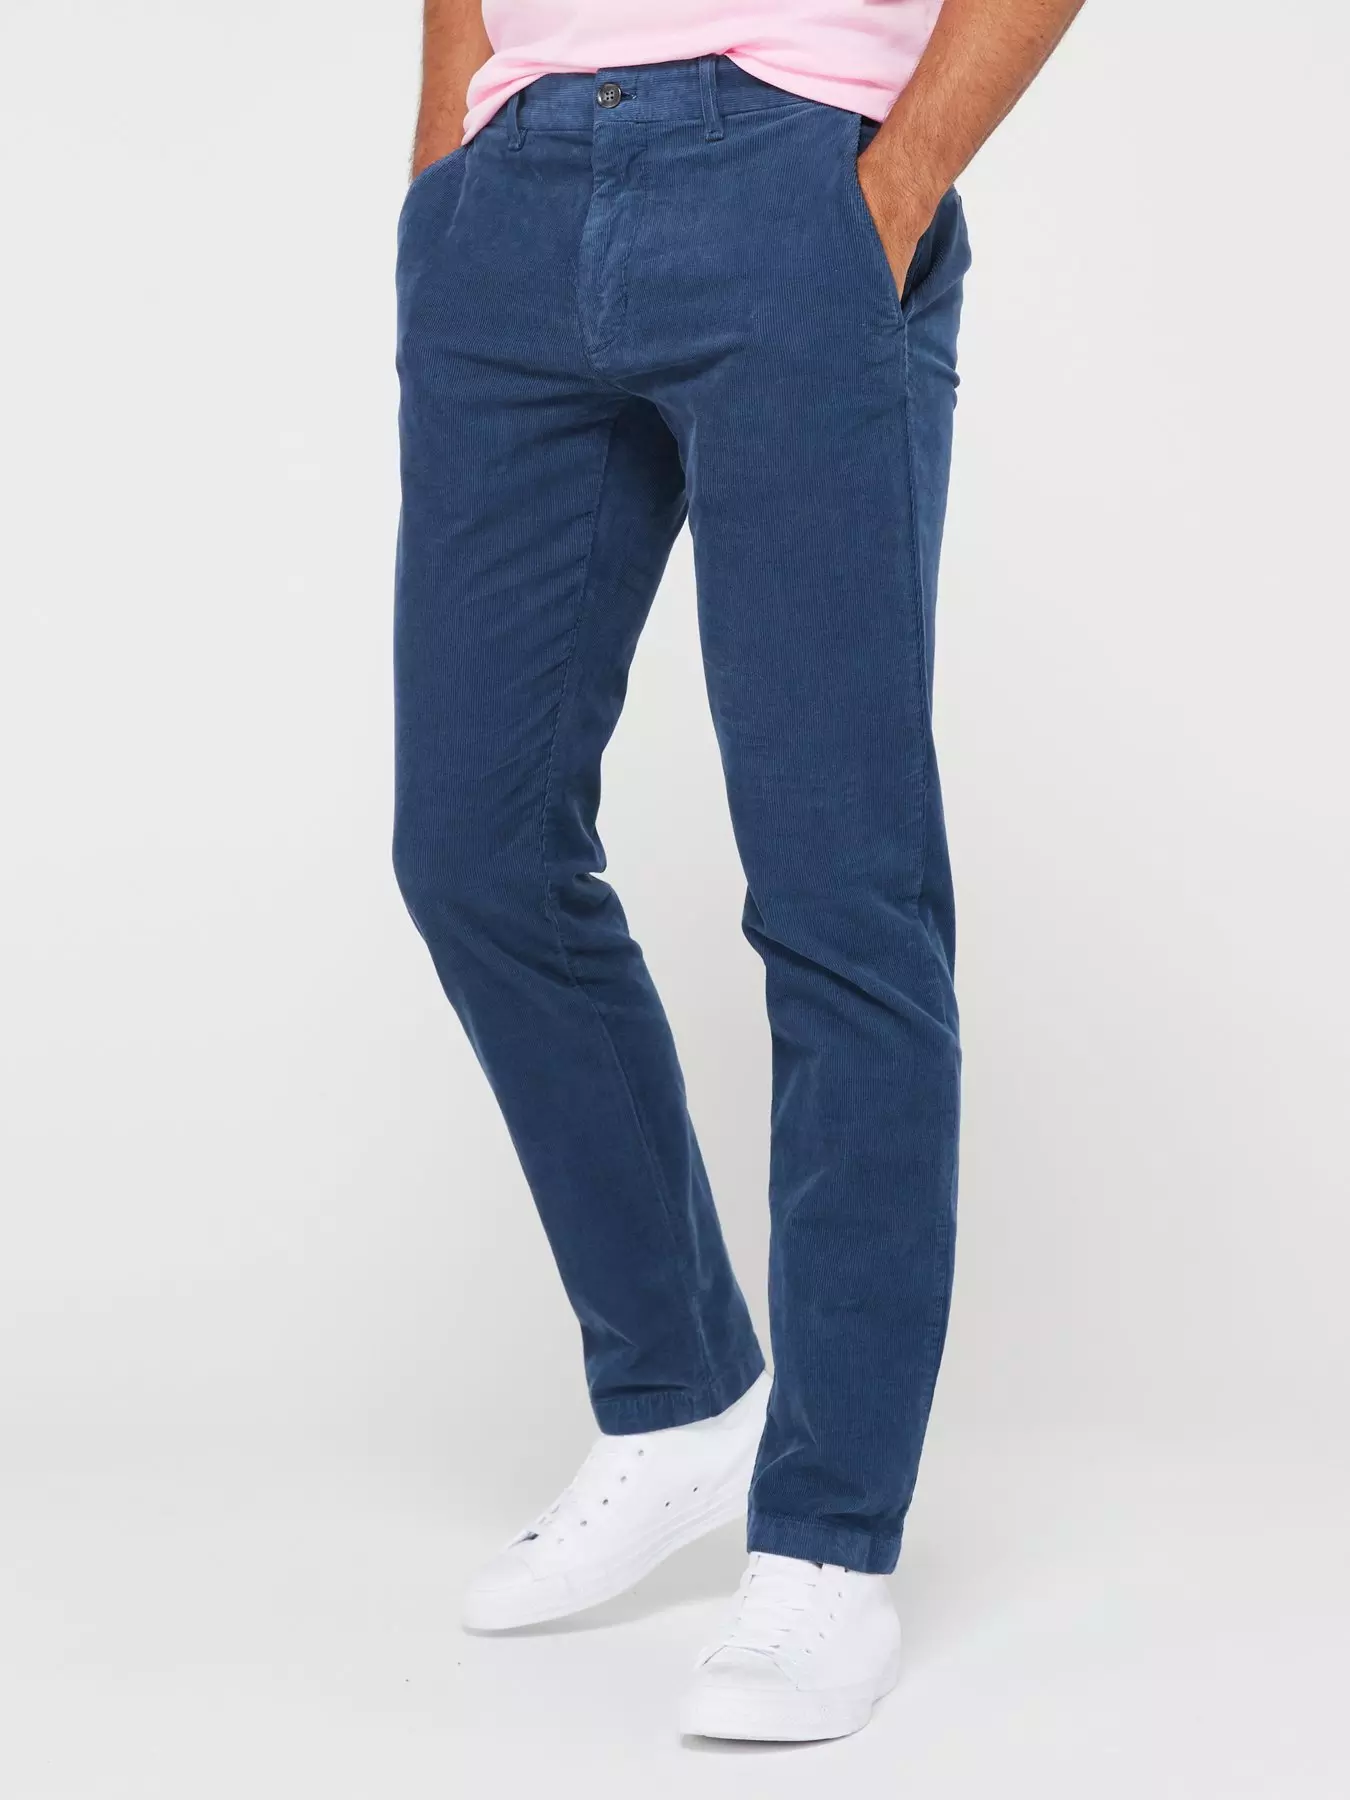 Tommy hilfiger | Trousers & chinos | Men |